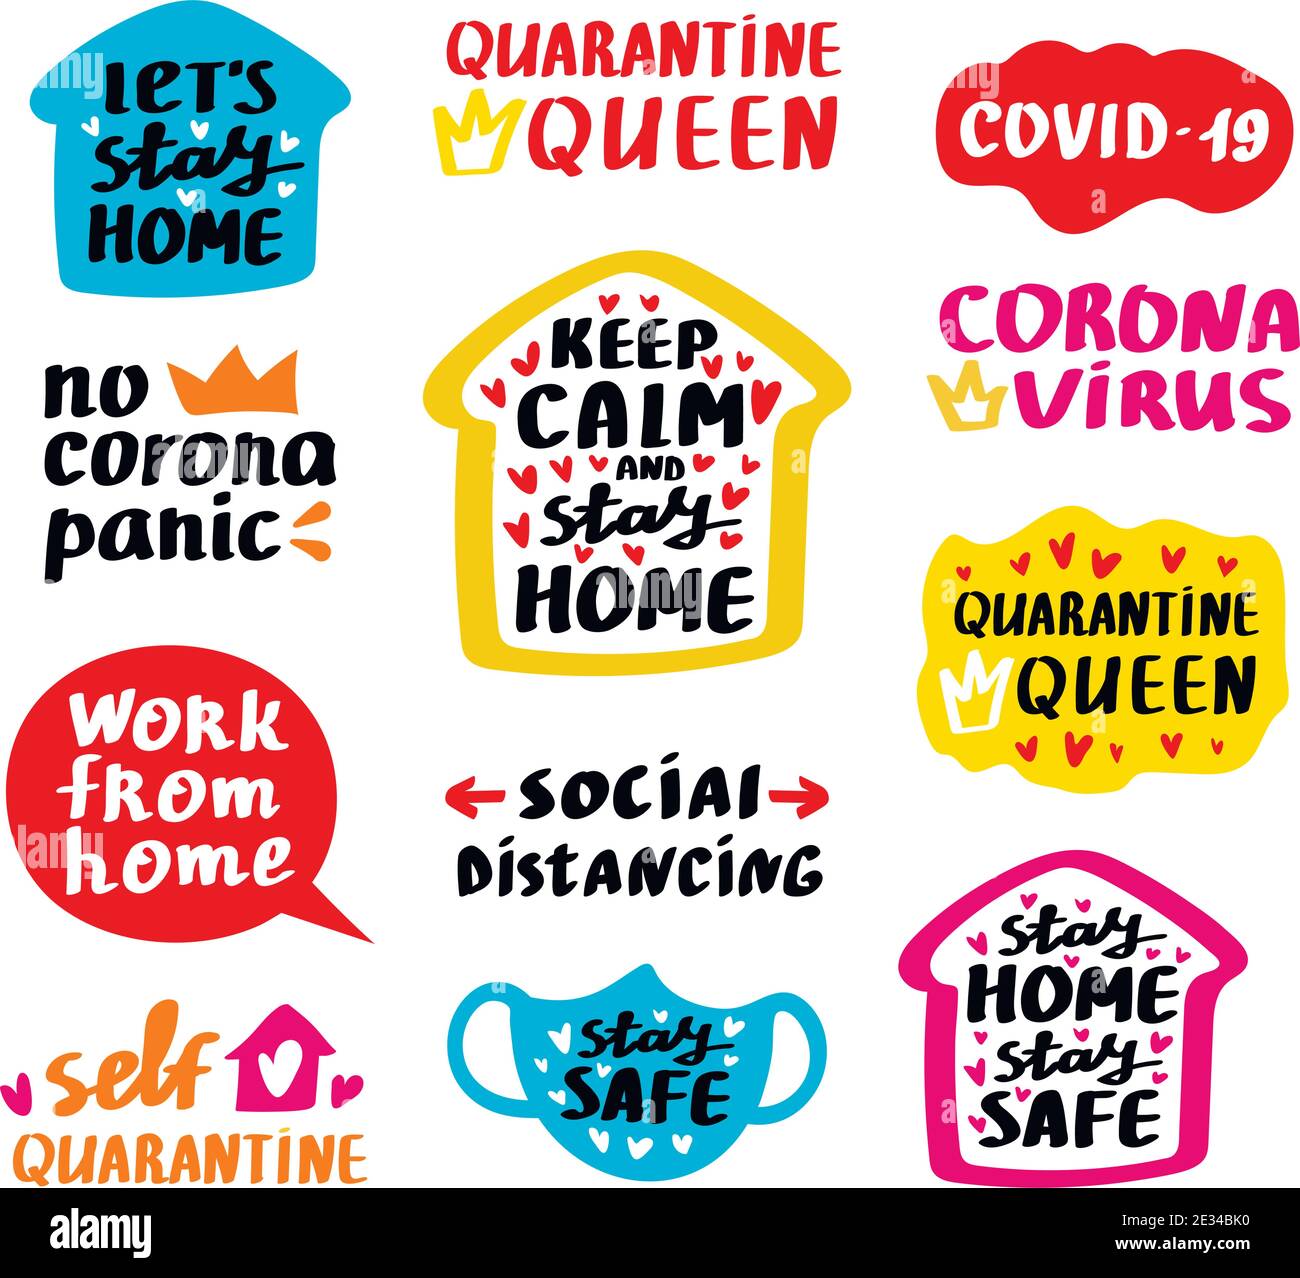 CoronaVirus Covid-19 letterings and other elements. Vector illustration. Stock Vector